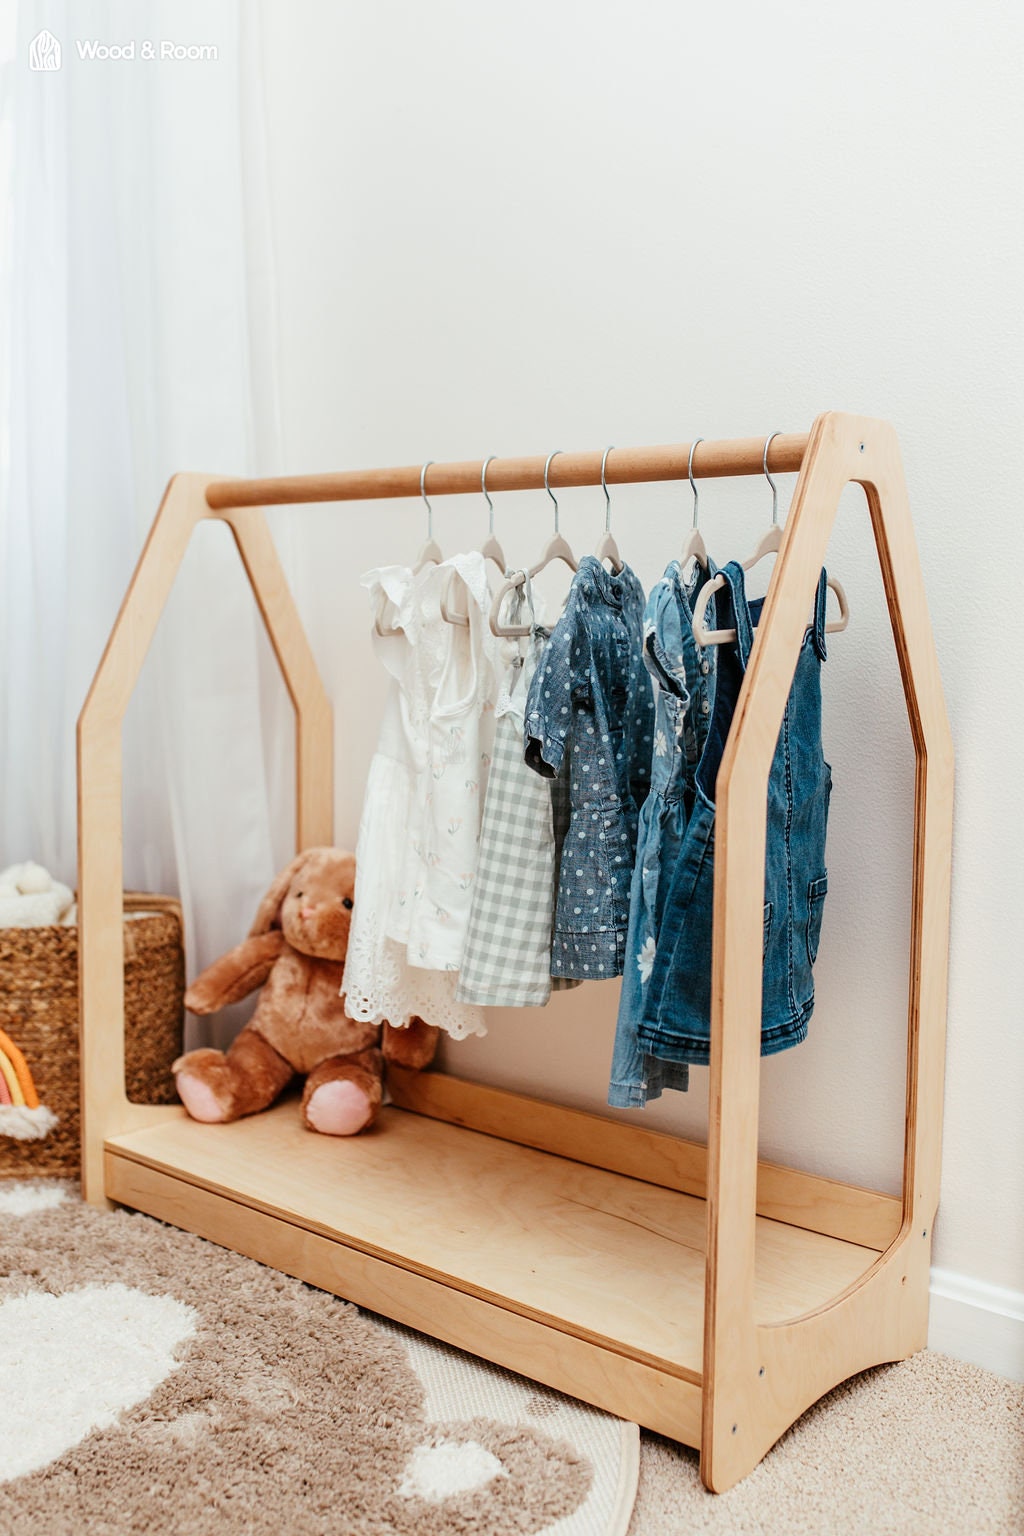 KIDS CLOTHING RACK Type A With Shelf, Wood Clothes Rack, Montessori Clothe  Hanging Rack and Shelf, Kids Wardrobe Christmas Gift for Kids 